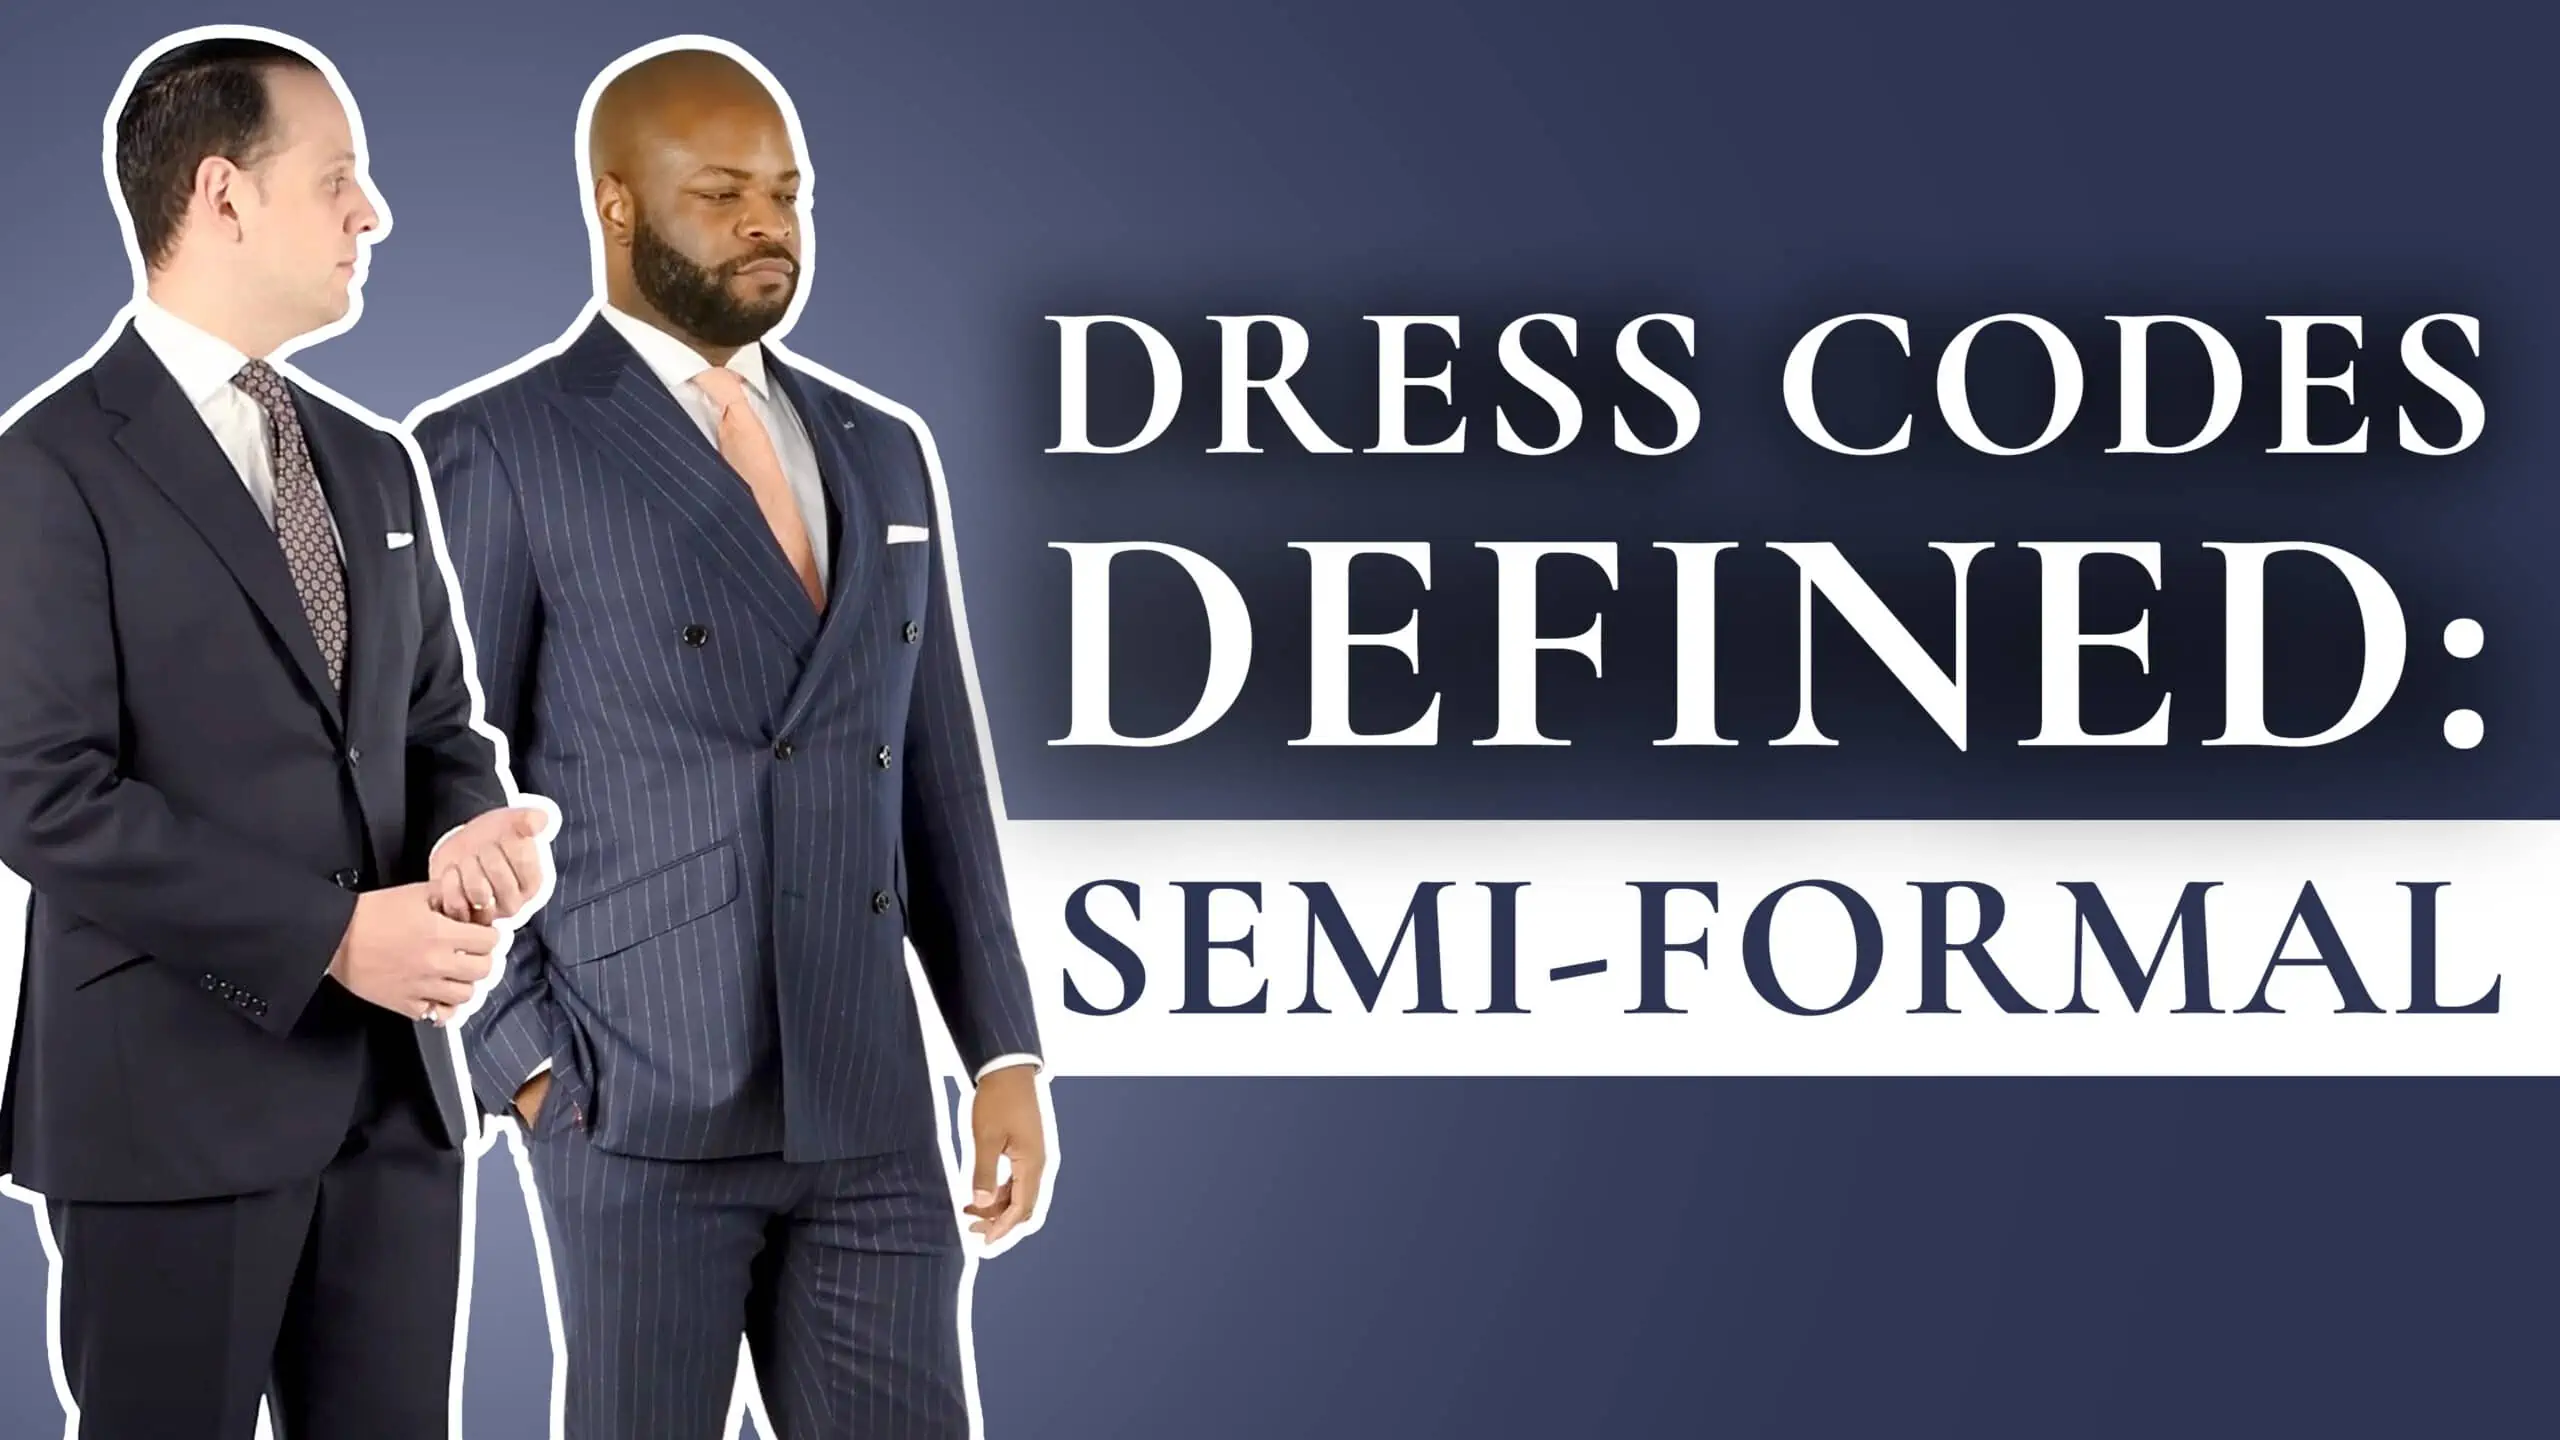 semi formal dress codes defined 3840x2160 scaled